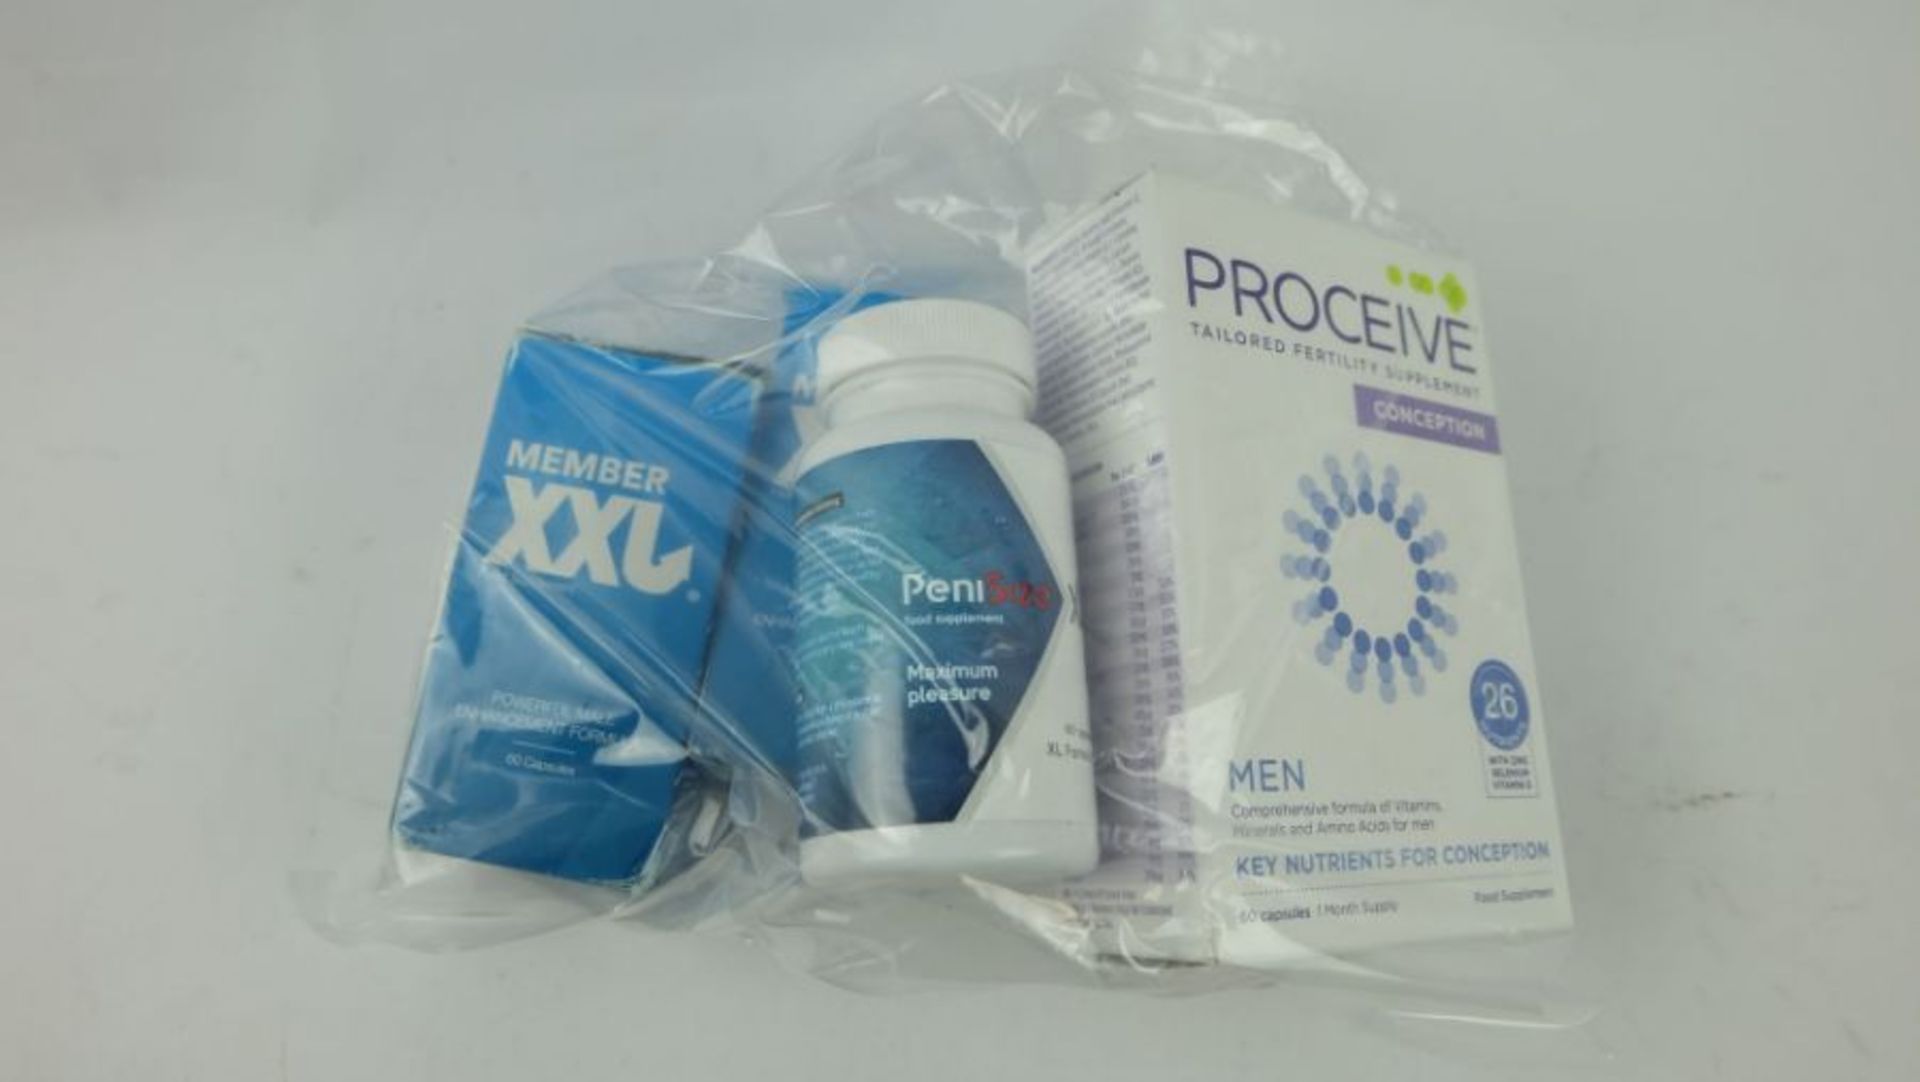 2 x Member XXL 60 Capsules BBE 04/24, 2 x PeniSize XL 60 Capsules BBE 07/24, 1 x Proceive Conception